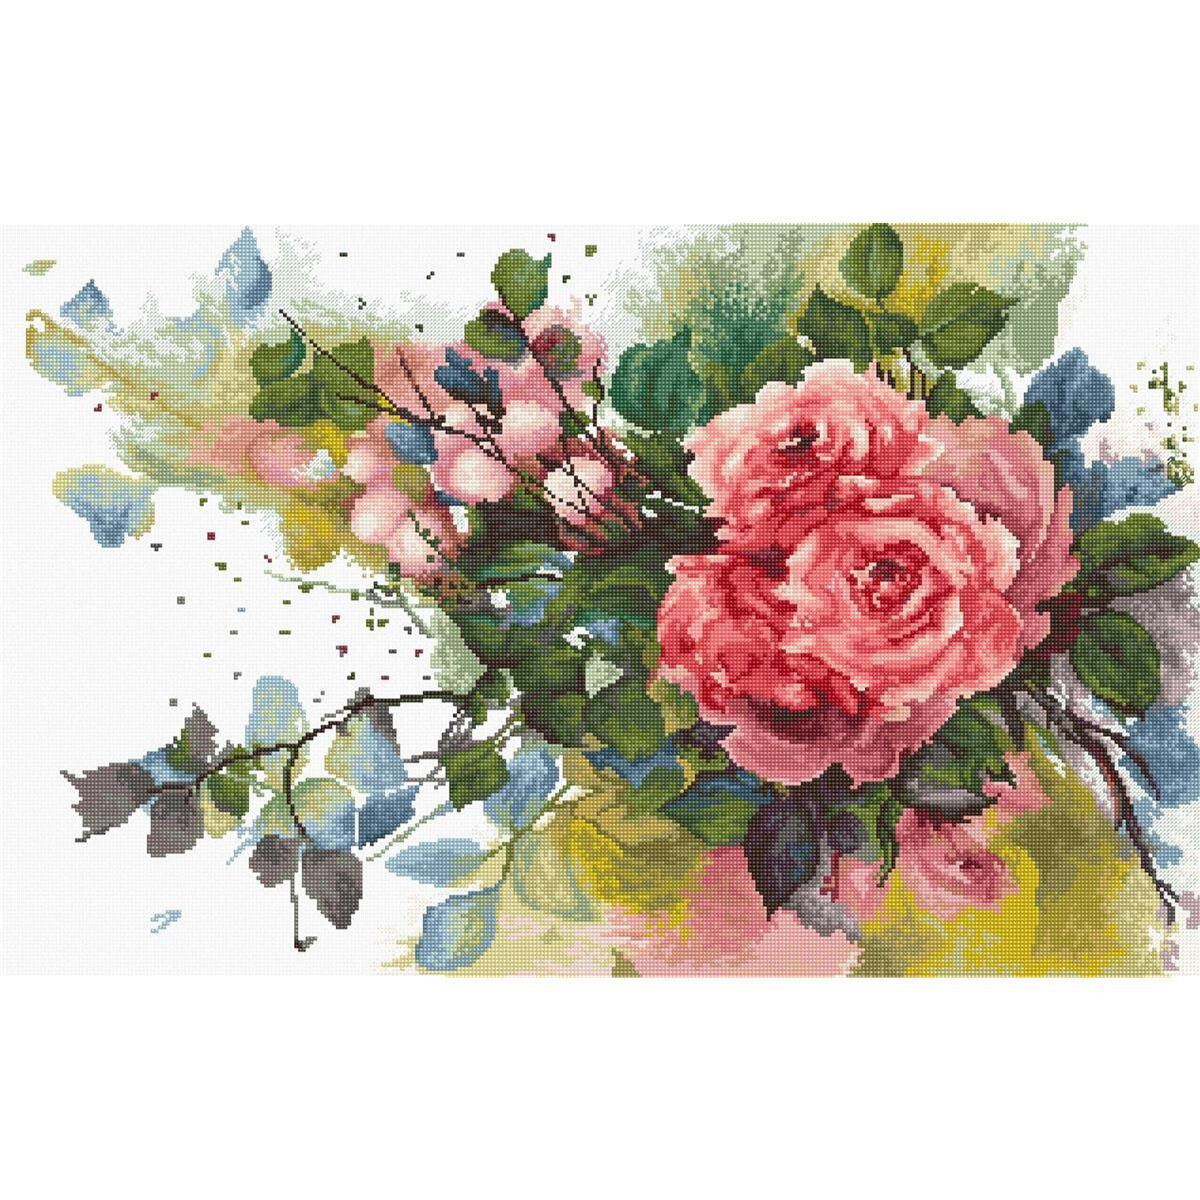 A vibrant watercolor depicts a bouquet of flowers...